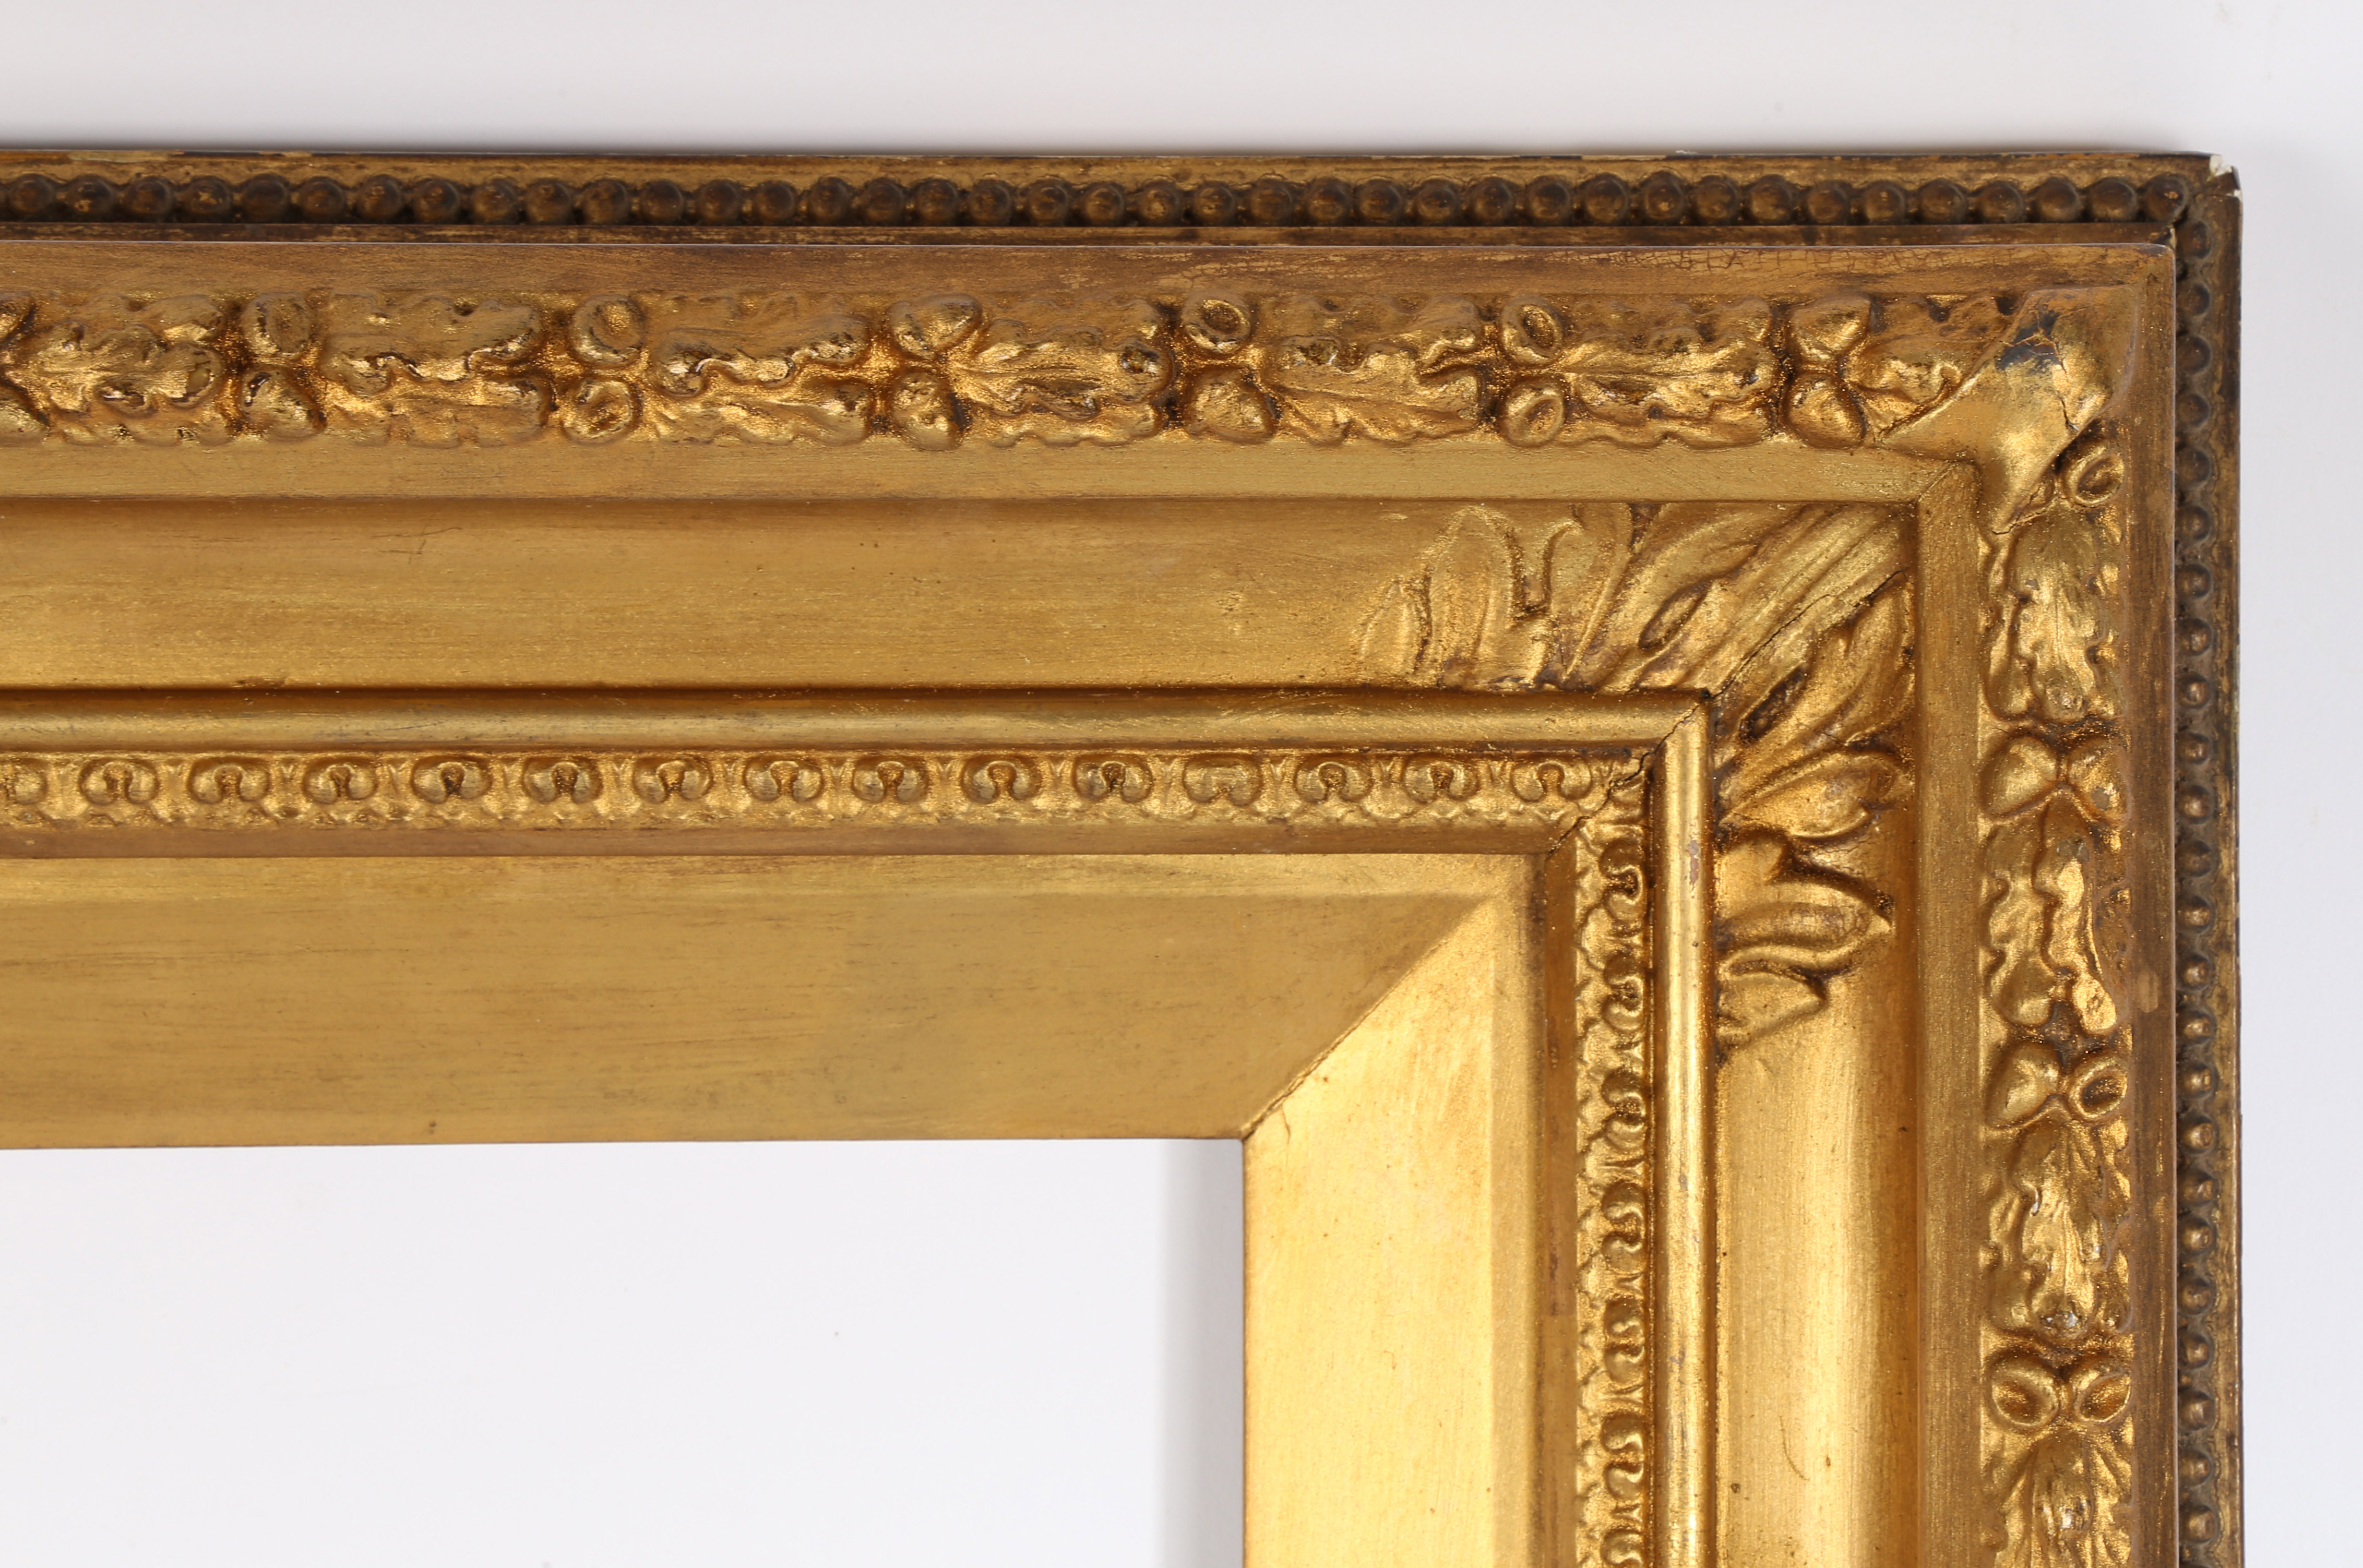 19th century straight picture frame with acanthus leaf corners - rebate size  10in x 8in